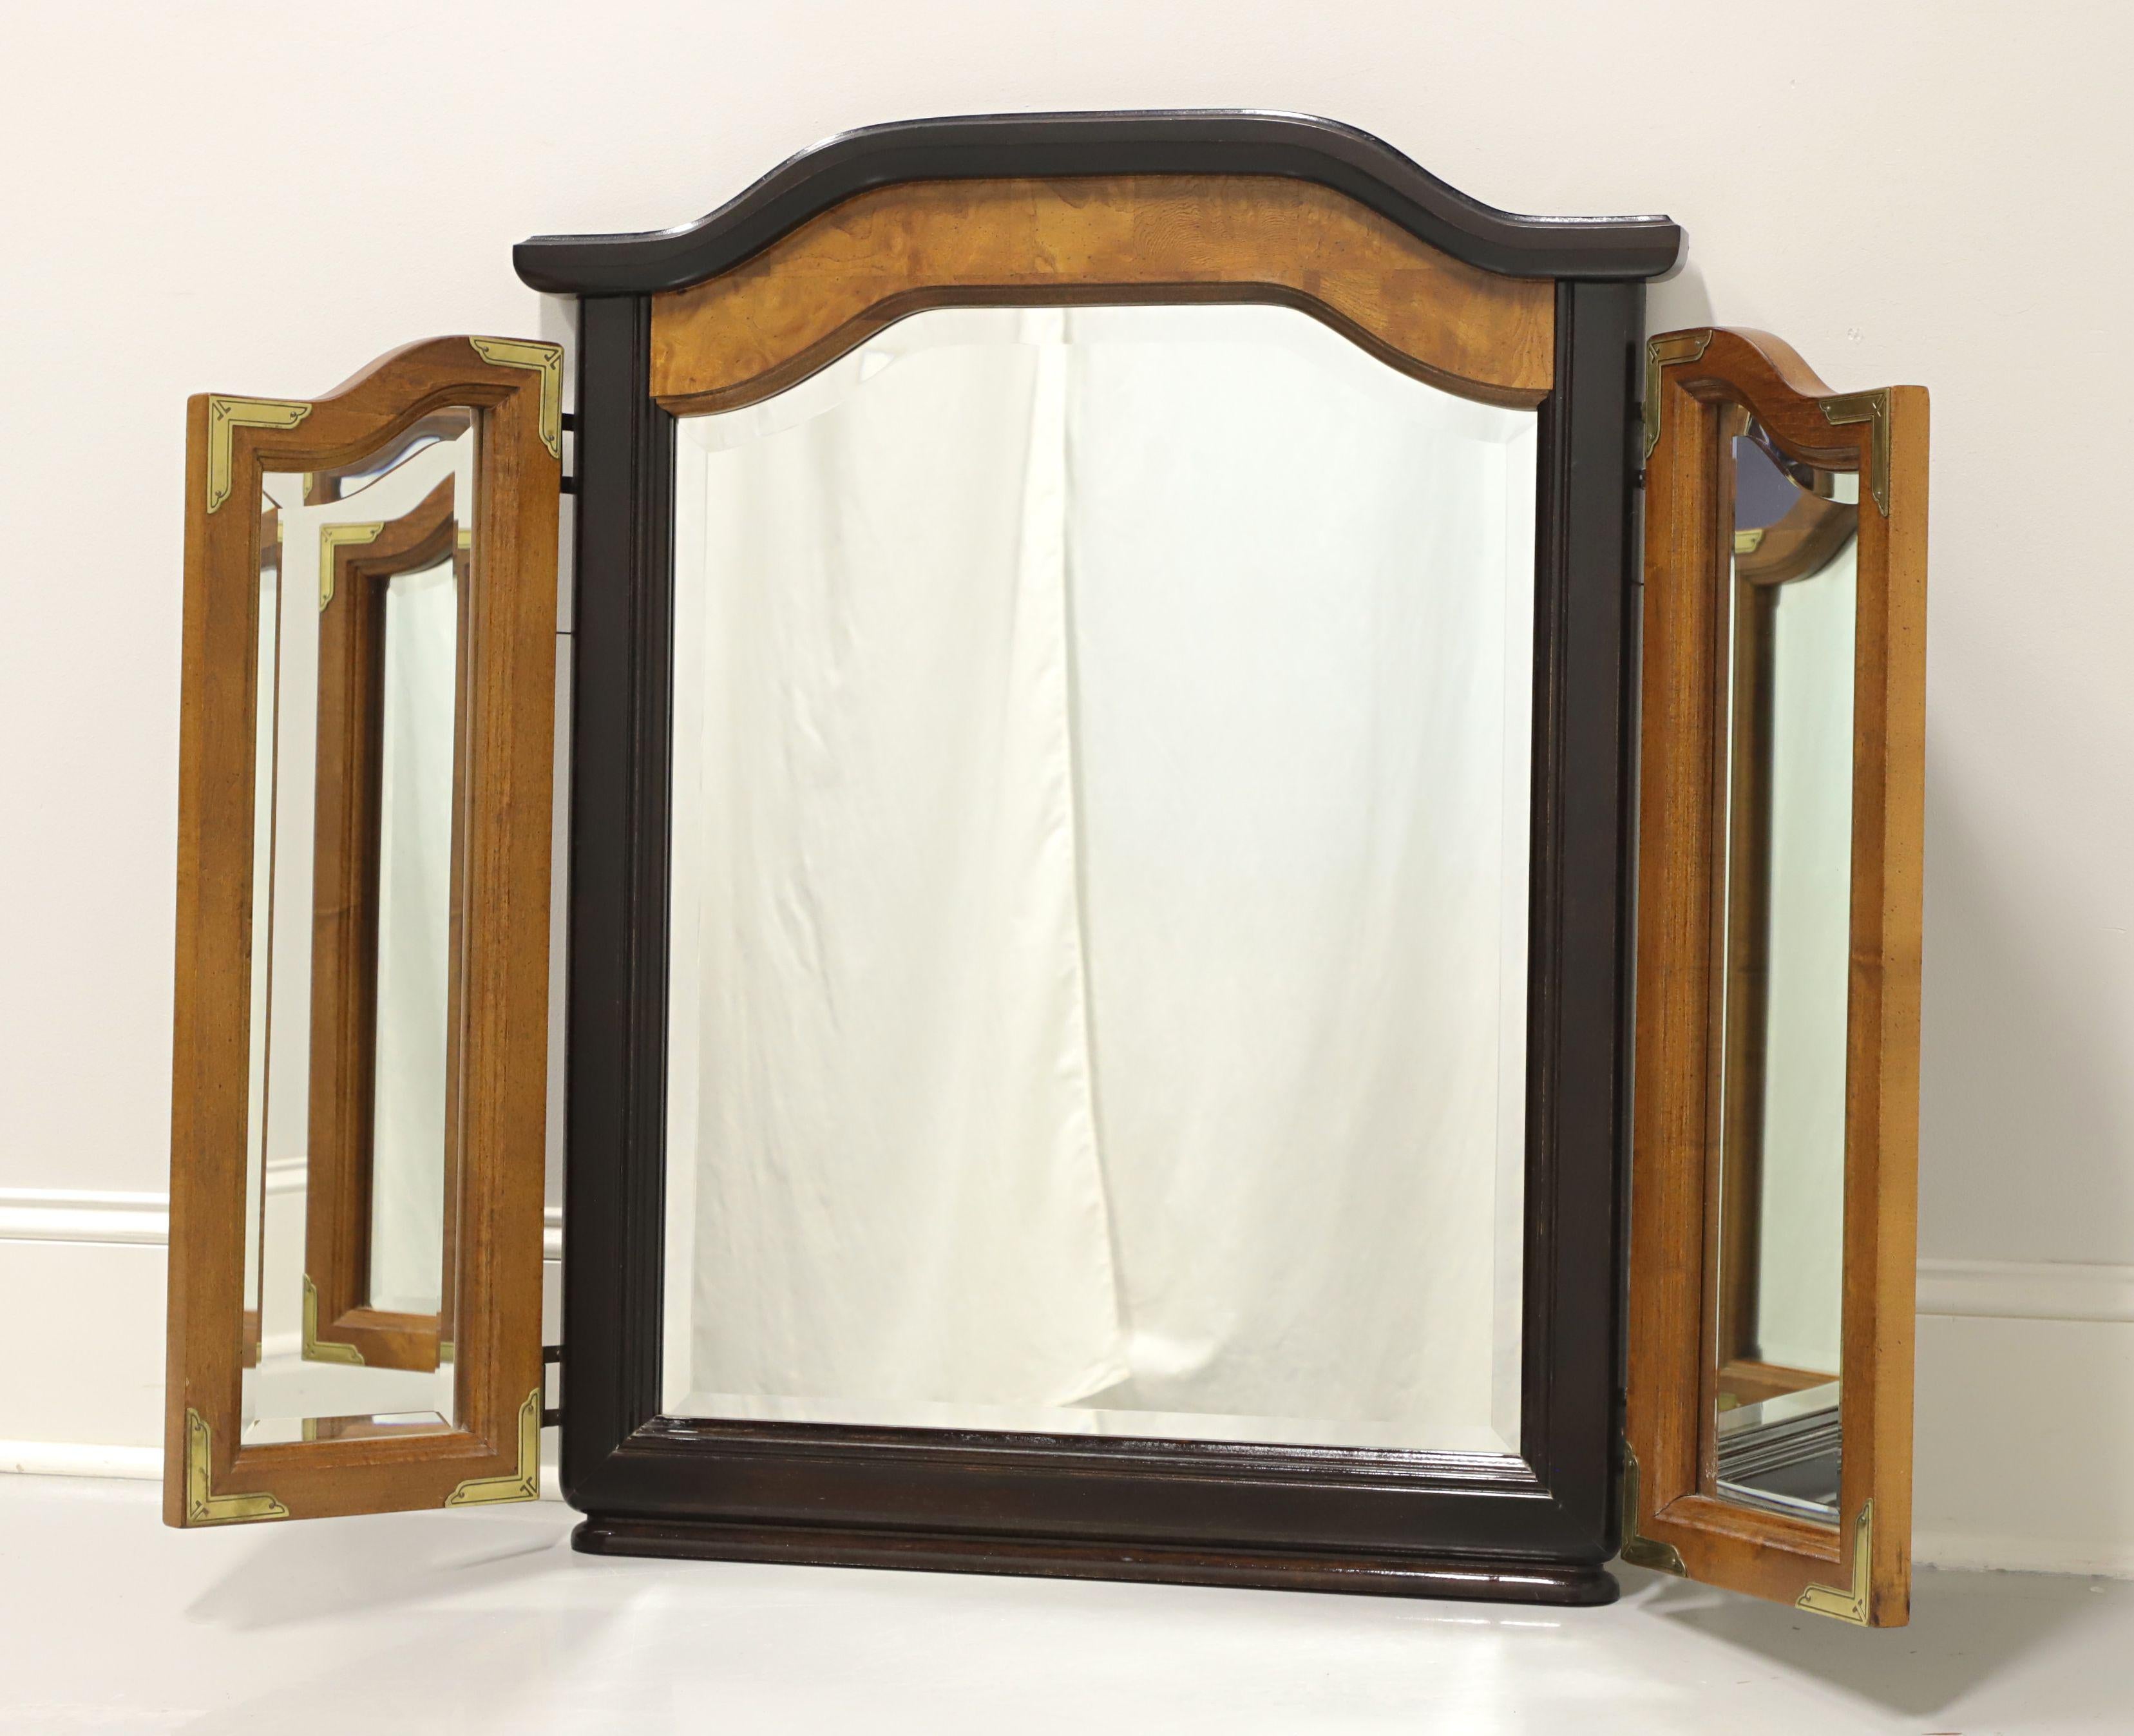 An Chinoiserie Ming style tri-fold dresser mirror by Broyhill Premier. Hardwood, burlwood and black lacquer with brass accents. Features bevel edge center mirror with a traditional Ming shape and two bevel edge side mirrors that can fold inward.